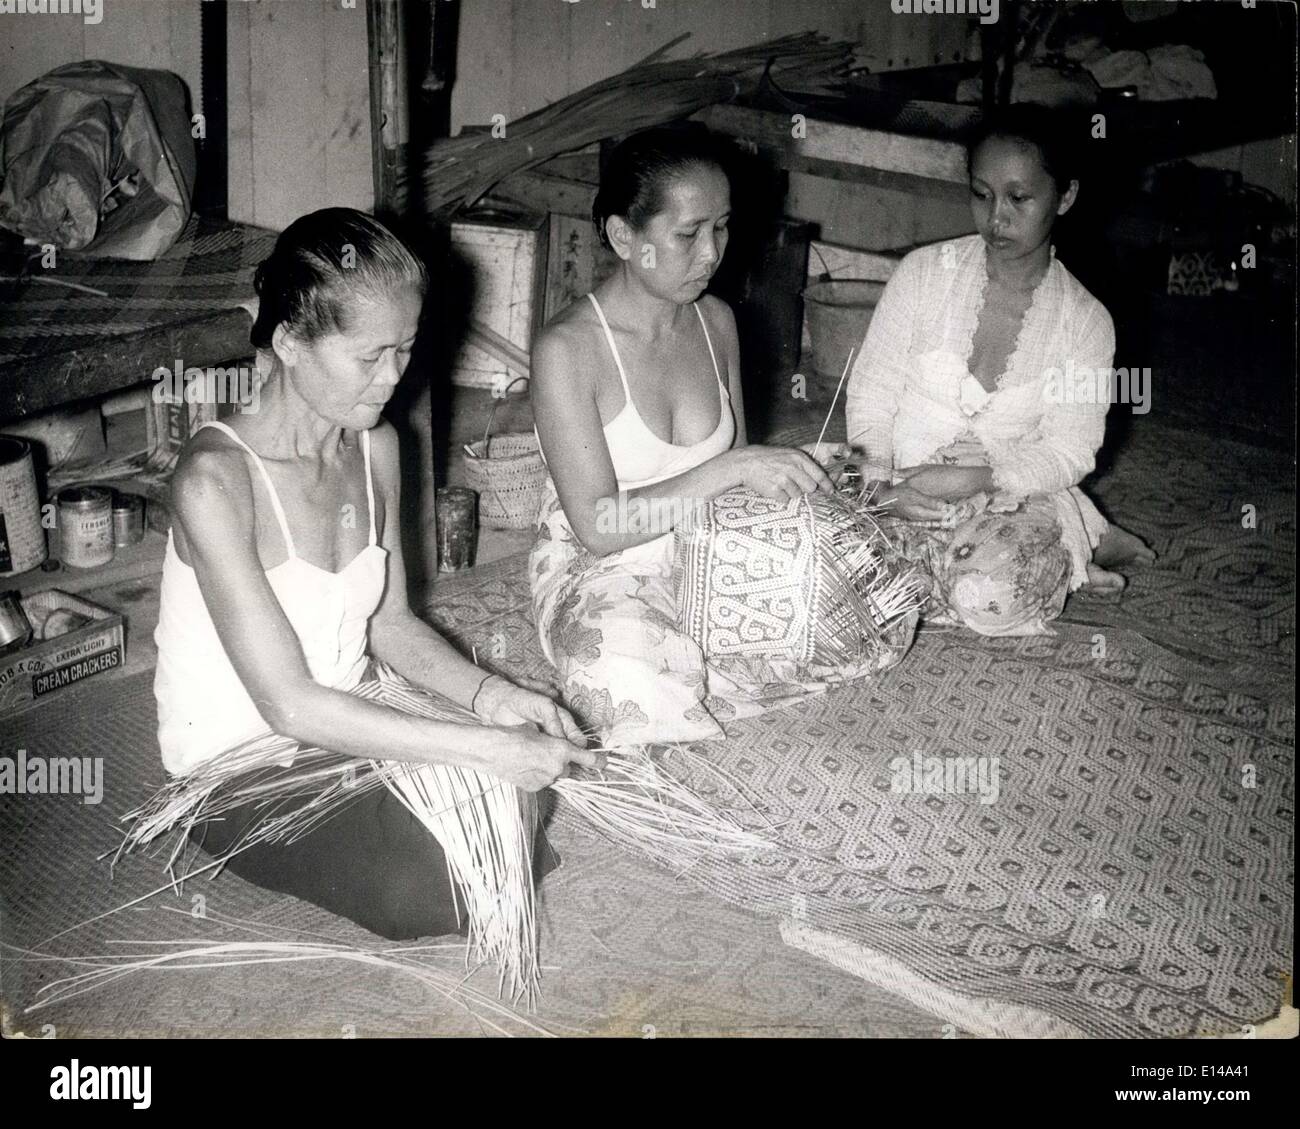 Apr. 17, 2012 - Native women make colorful baskets. Sarawak leper women in the settlement work as weavers. They make colorful baskets which the settlement markets for them. Winning a war against leprosy: The scourge is a scourge no longer wonder drugs guarantee cures for Sarawak's native population: New drugs being used at the Sir Charles Brooke memorial settlement, 13 miles from Kuching, are taking away all terror of the disease which once meant social banishment for the afflicted. In the past 10 years, a transformation in diagnosis and treatment (Illegible) place Stock Photo